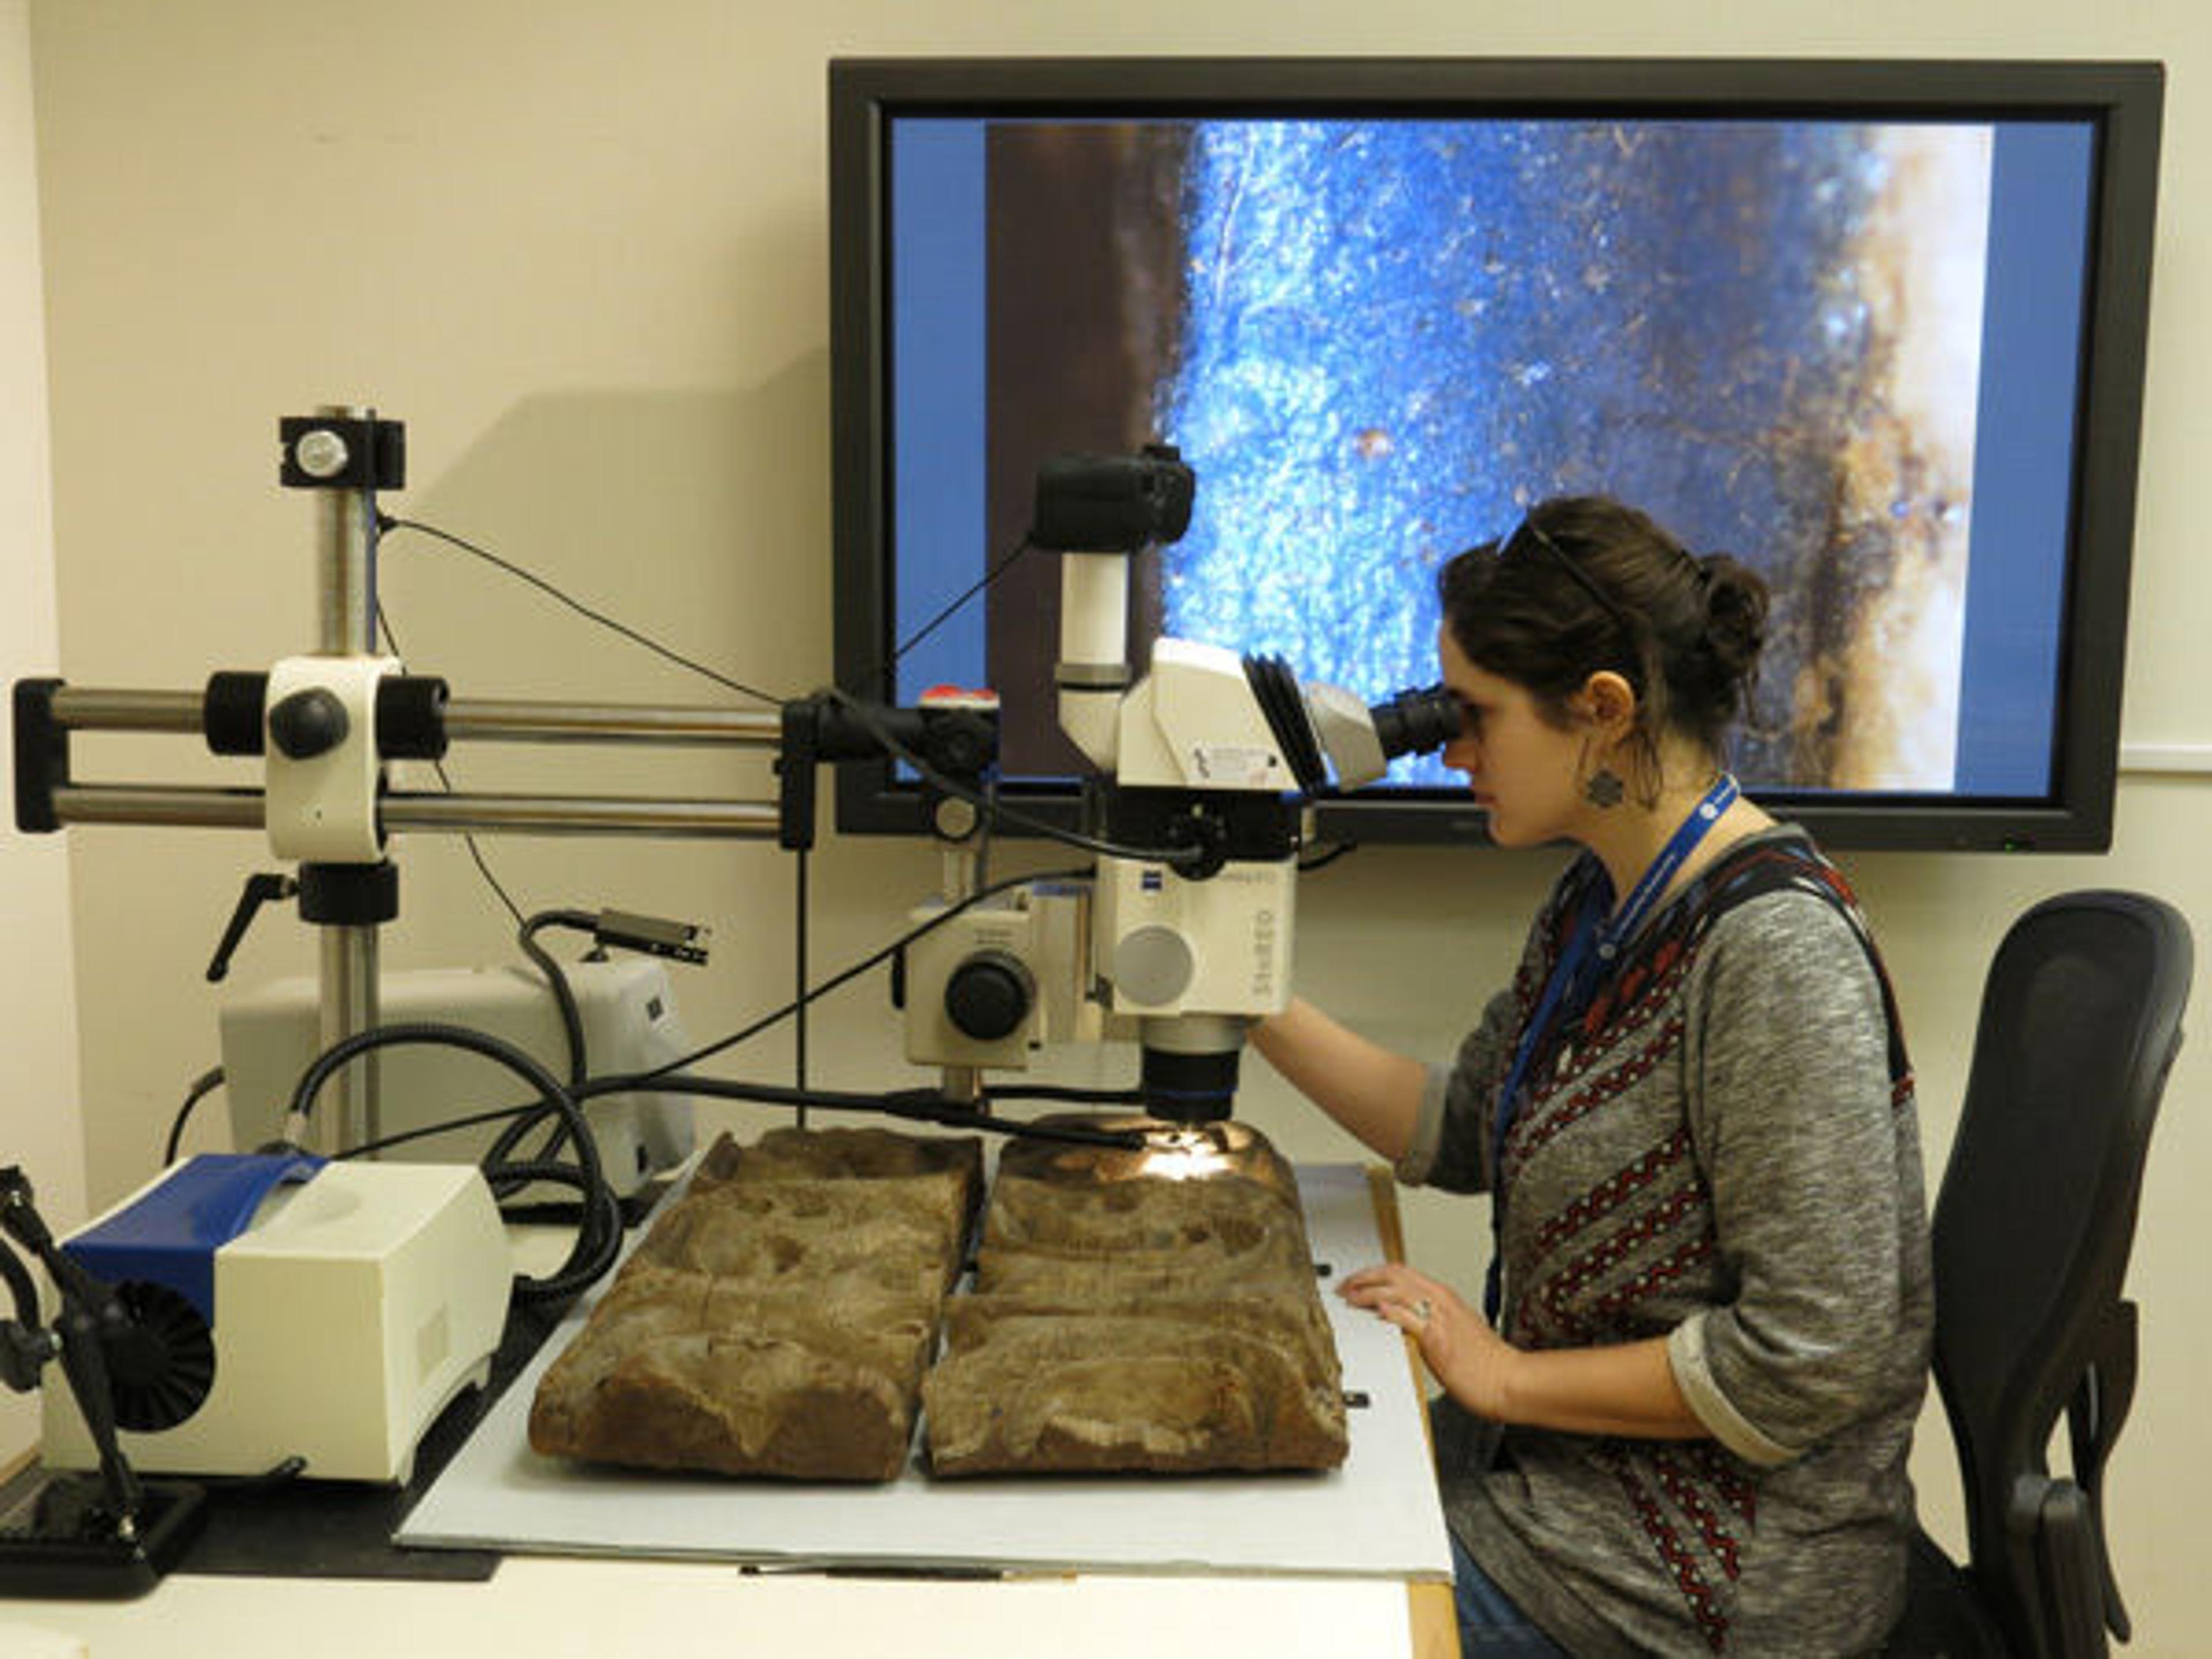 Conservation Intern Gaëlle Gantier examines wooden panel 32.102.1,2 under a stereo microscope. The image on the screen behind her shows the blue paint under high magnification—the projected live-view of the camera attached to the microscope.